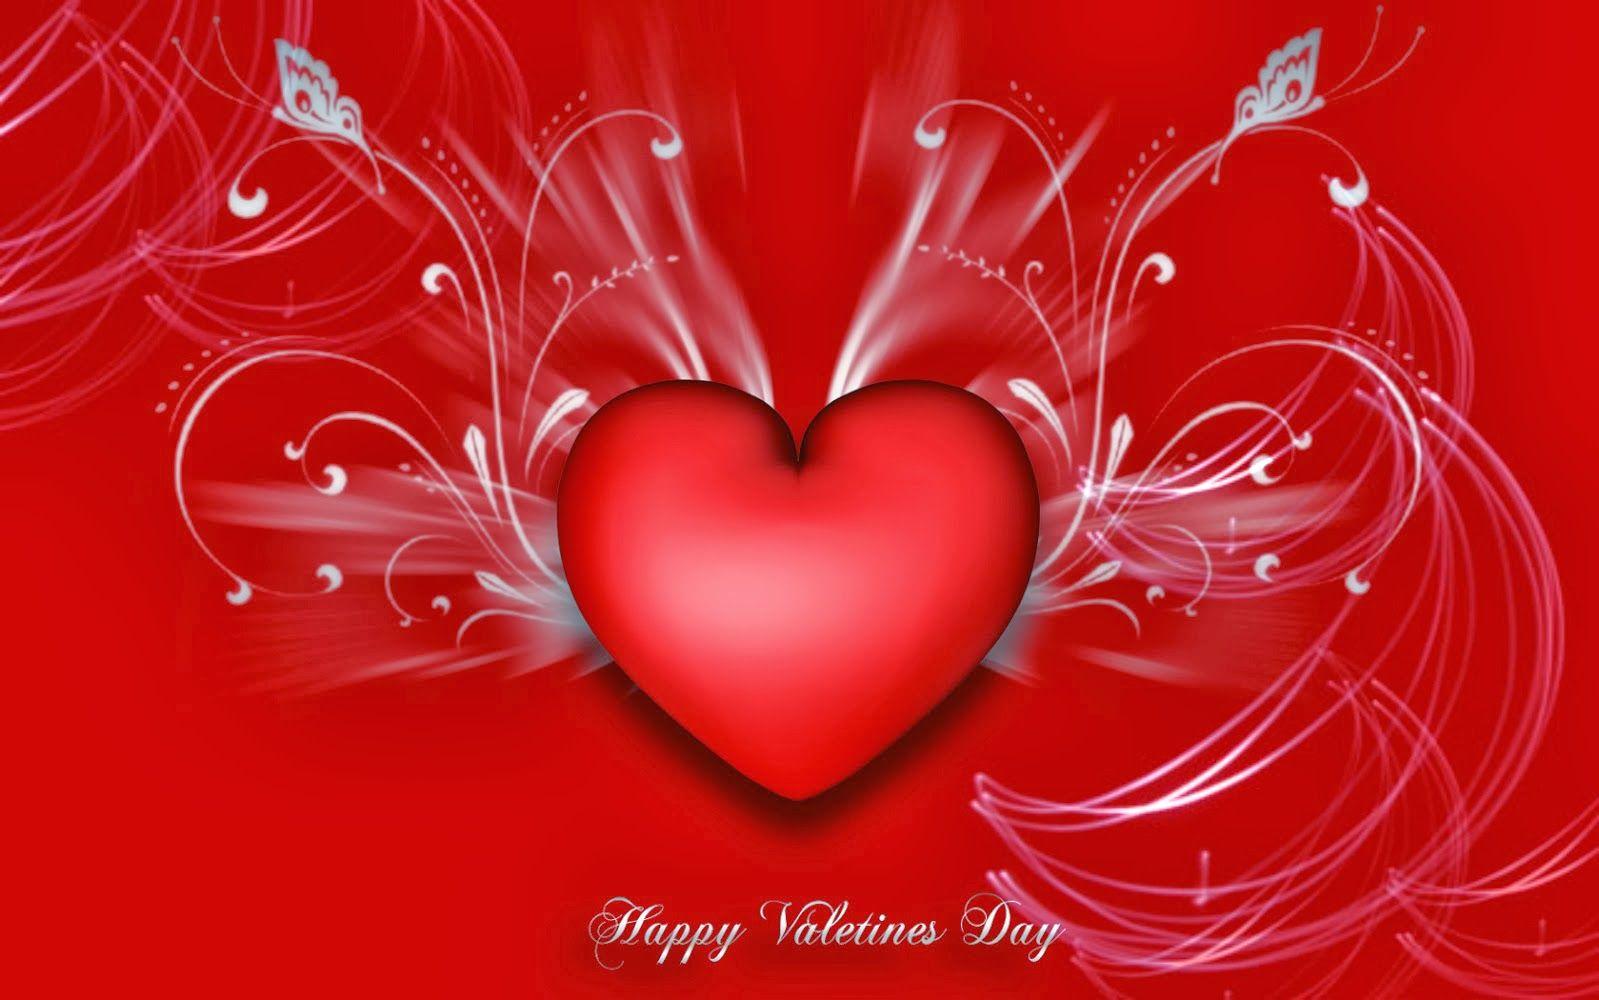 Valentines day 2014 wallpaper (HD) Free Download. Things for My